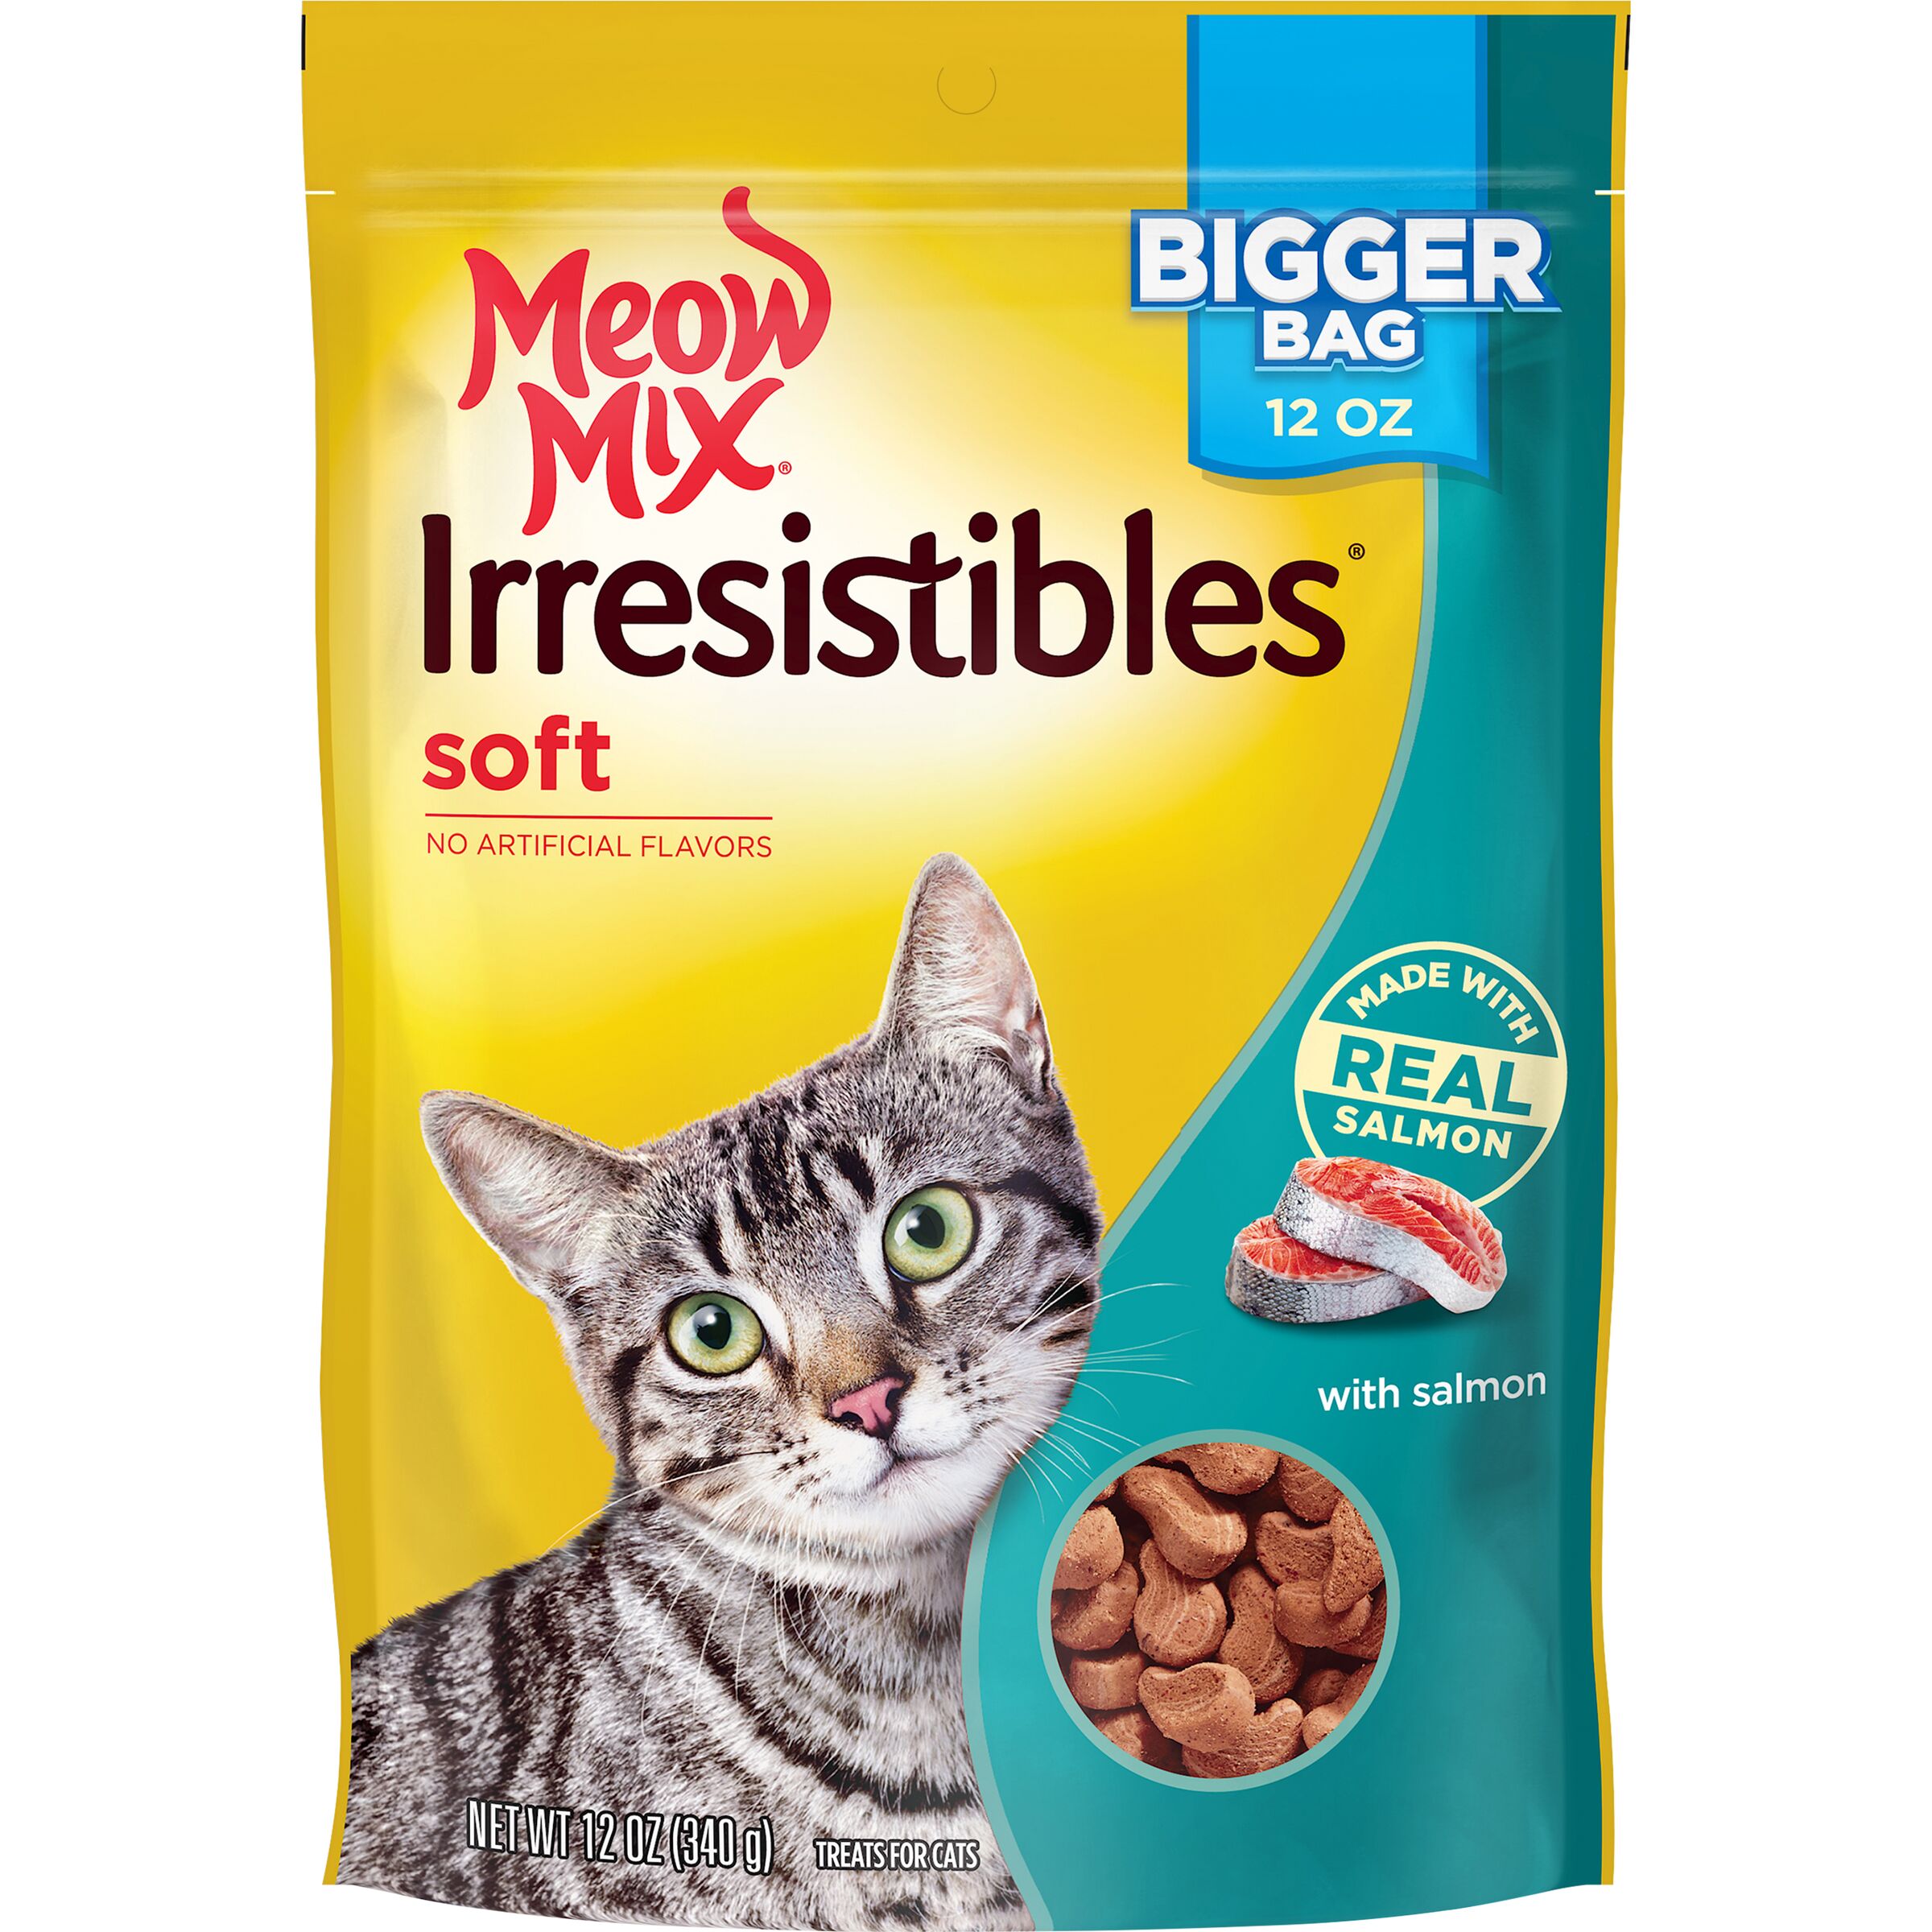 Meow Mix Irresistibles Cat Treats - Soft With Salmon, 12-Ounce Bag - image 1 of 8